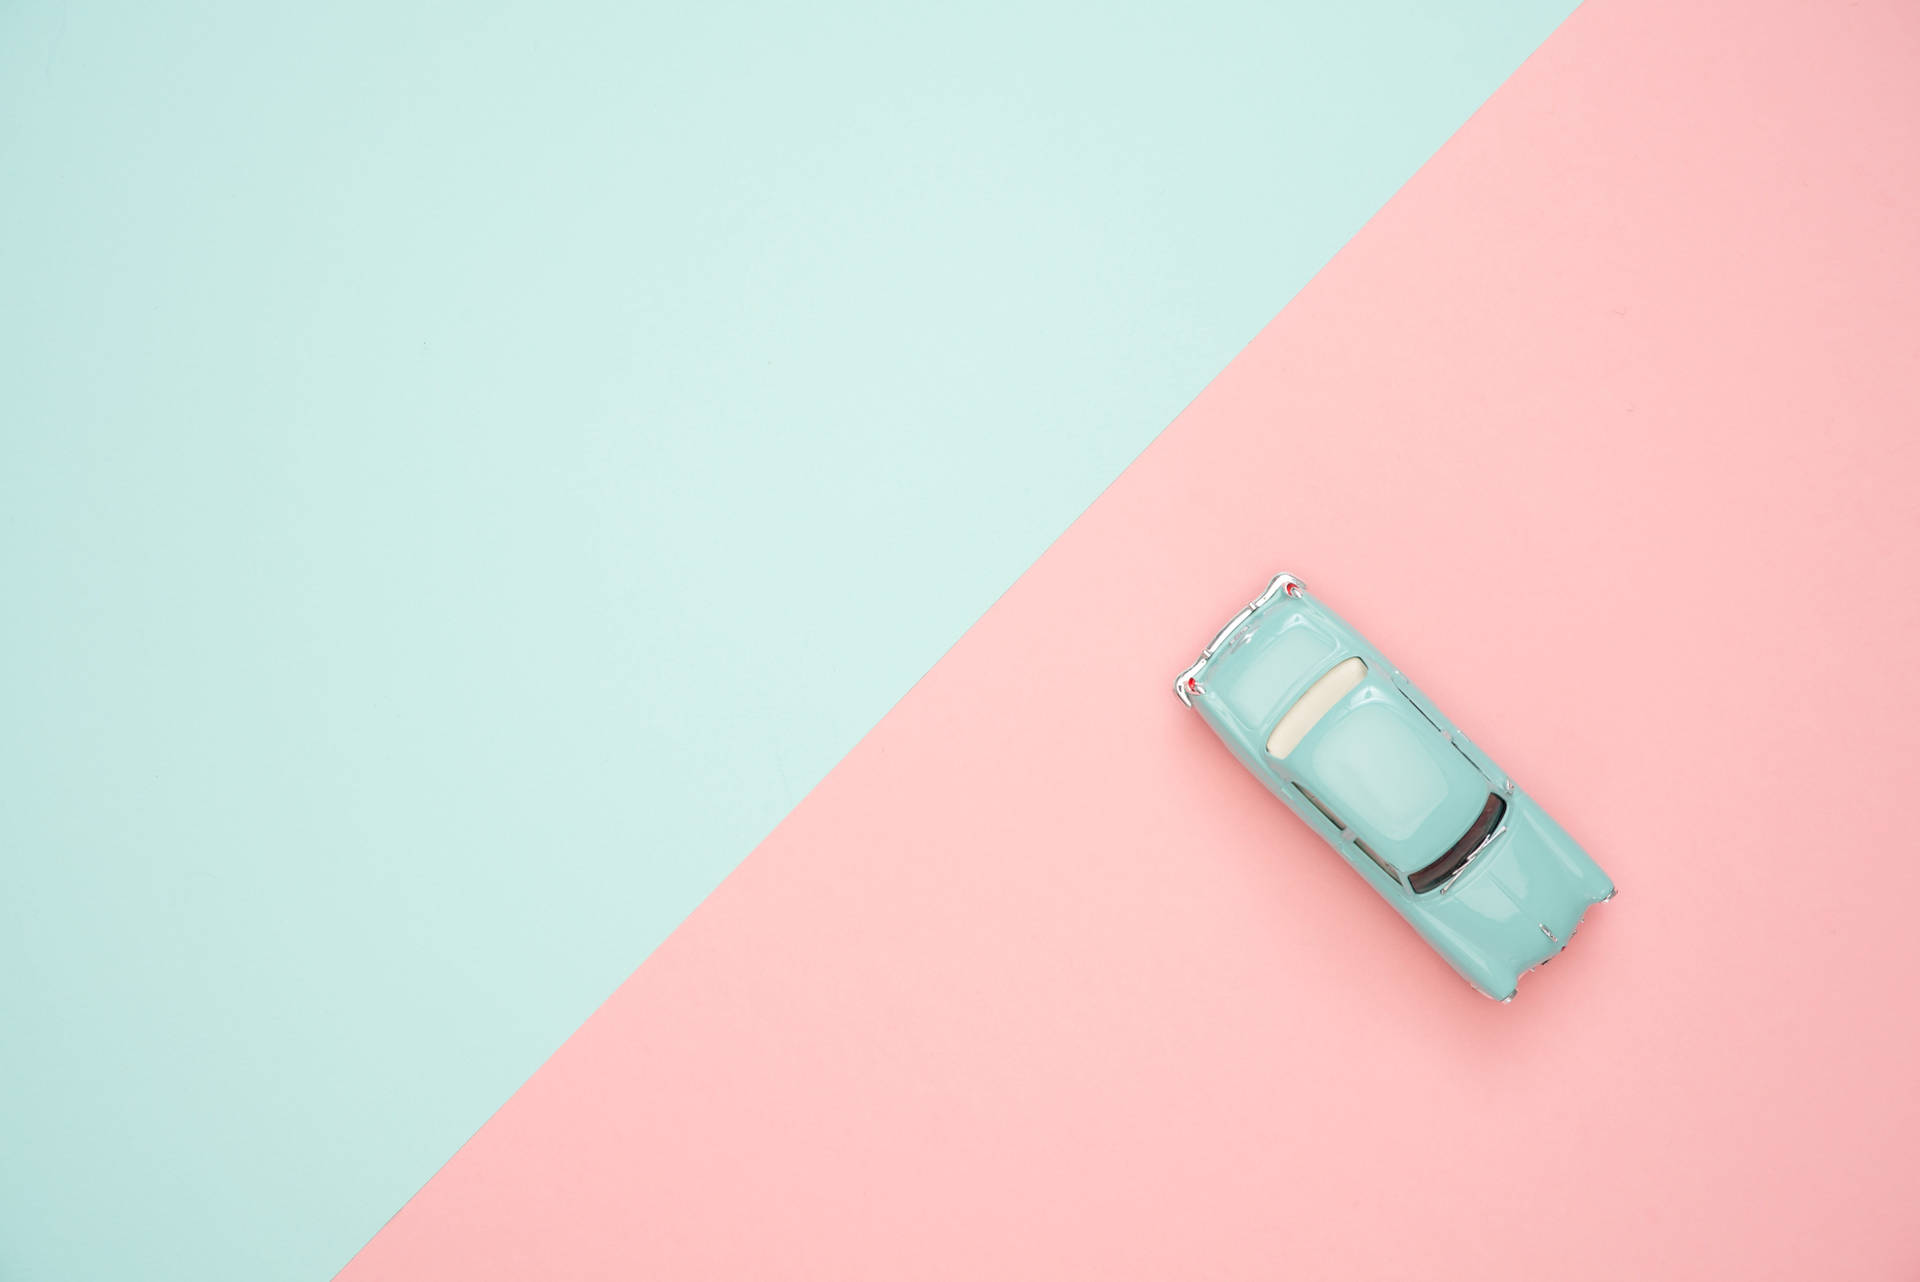 6016X4016 Pastel Aesthetic Wallpaper and Background